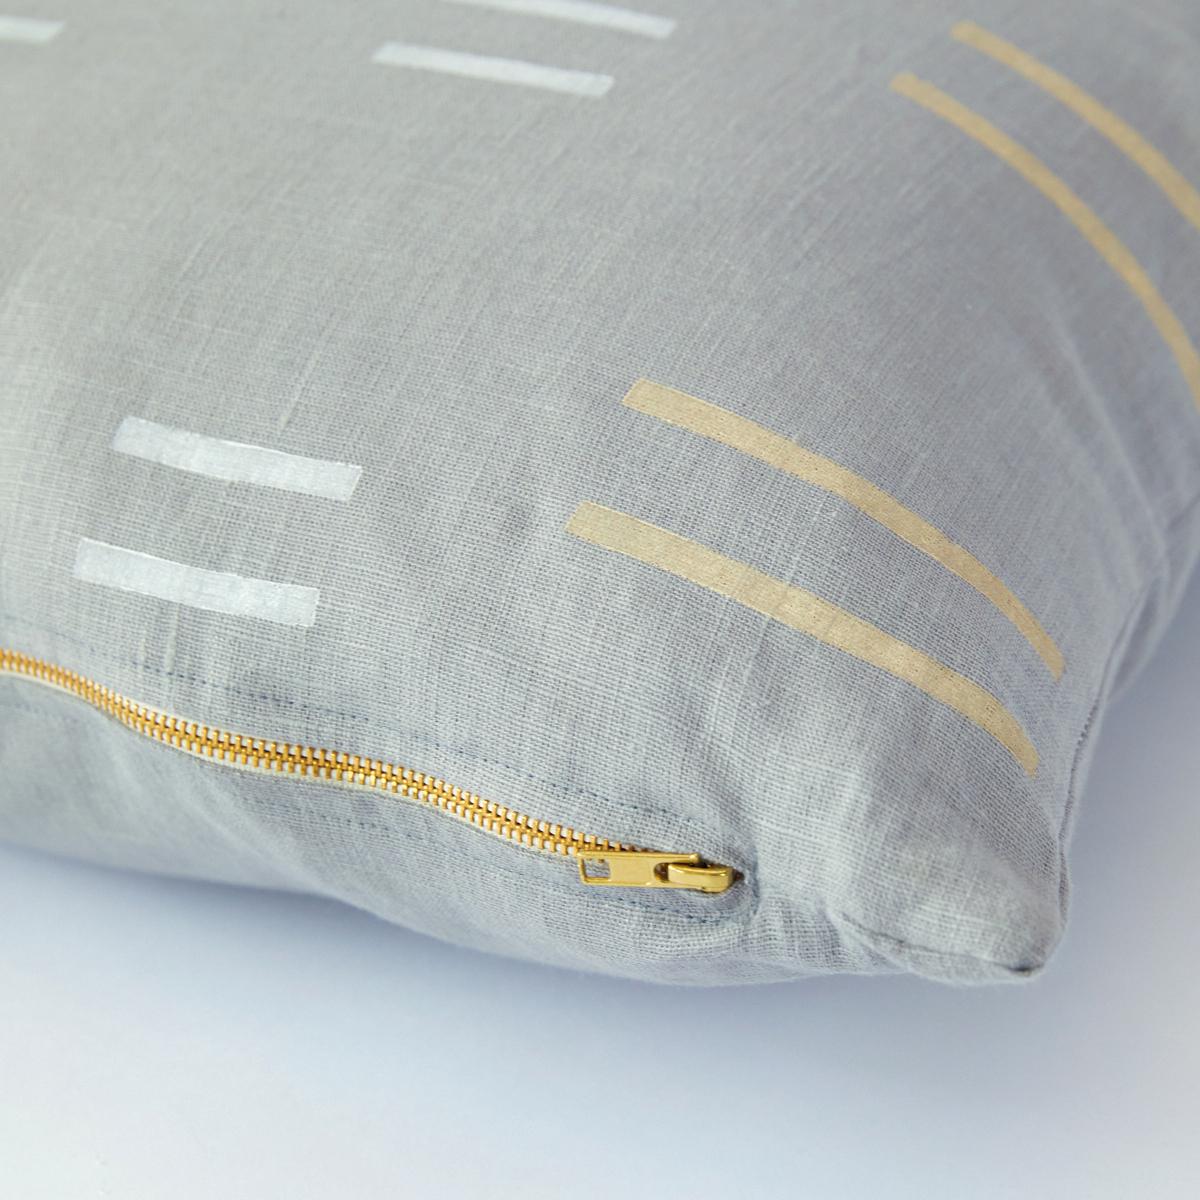 This pillow features Oaxaca by Caroline Z Hurleywith a knife edge finish. Designed by Caroline Z Hurley in her Brooklyn studio and block-printed in New Bedford, Massachusetts. Each shape is cut and individually stamped onto the linen by hand. Pillow